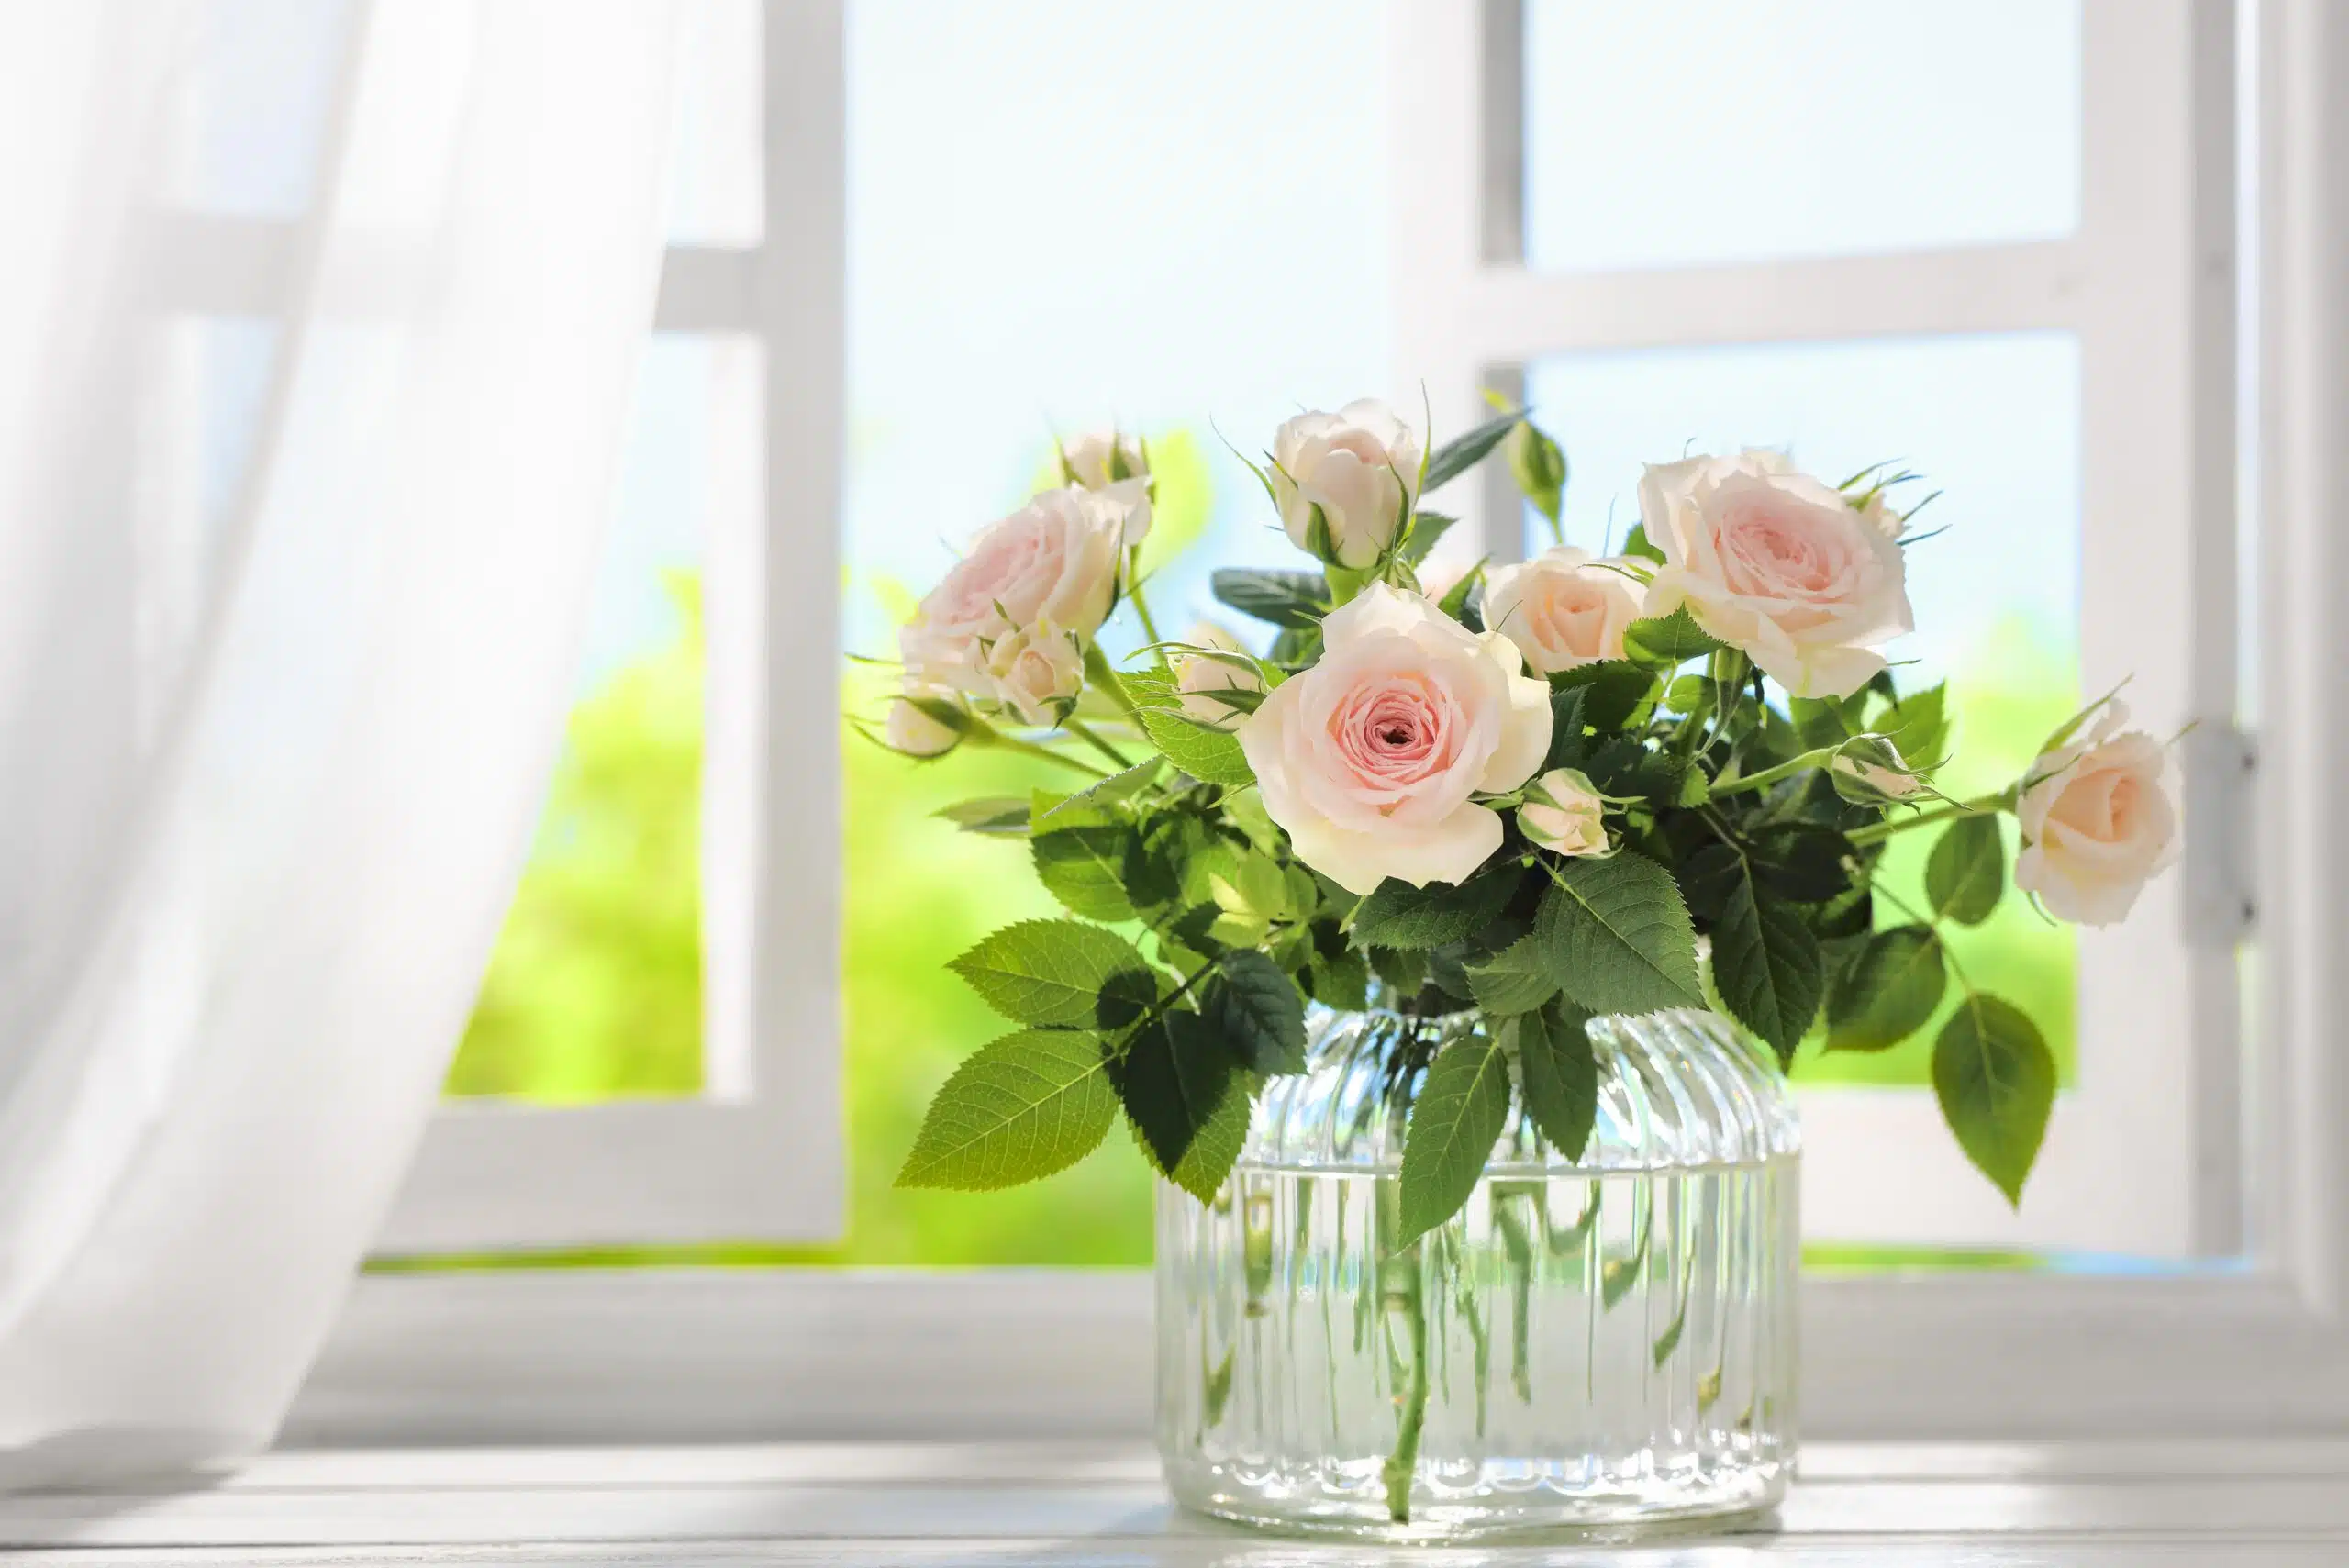 Three potted flower stand on the windowsill in the curtains background